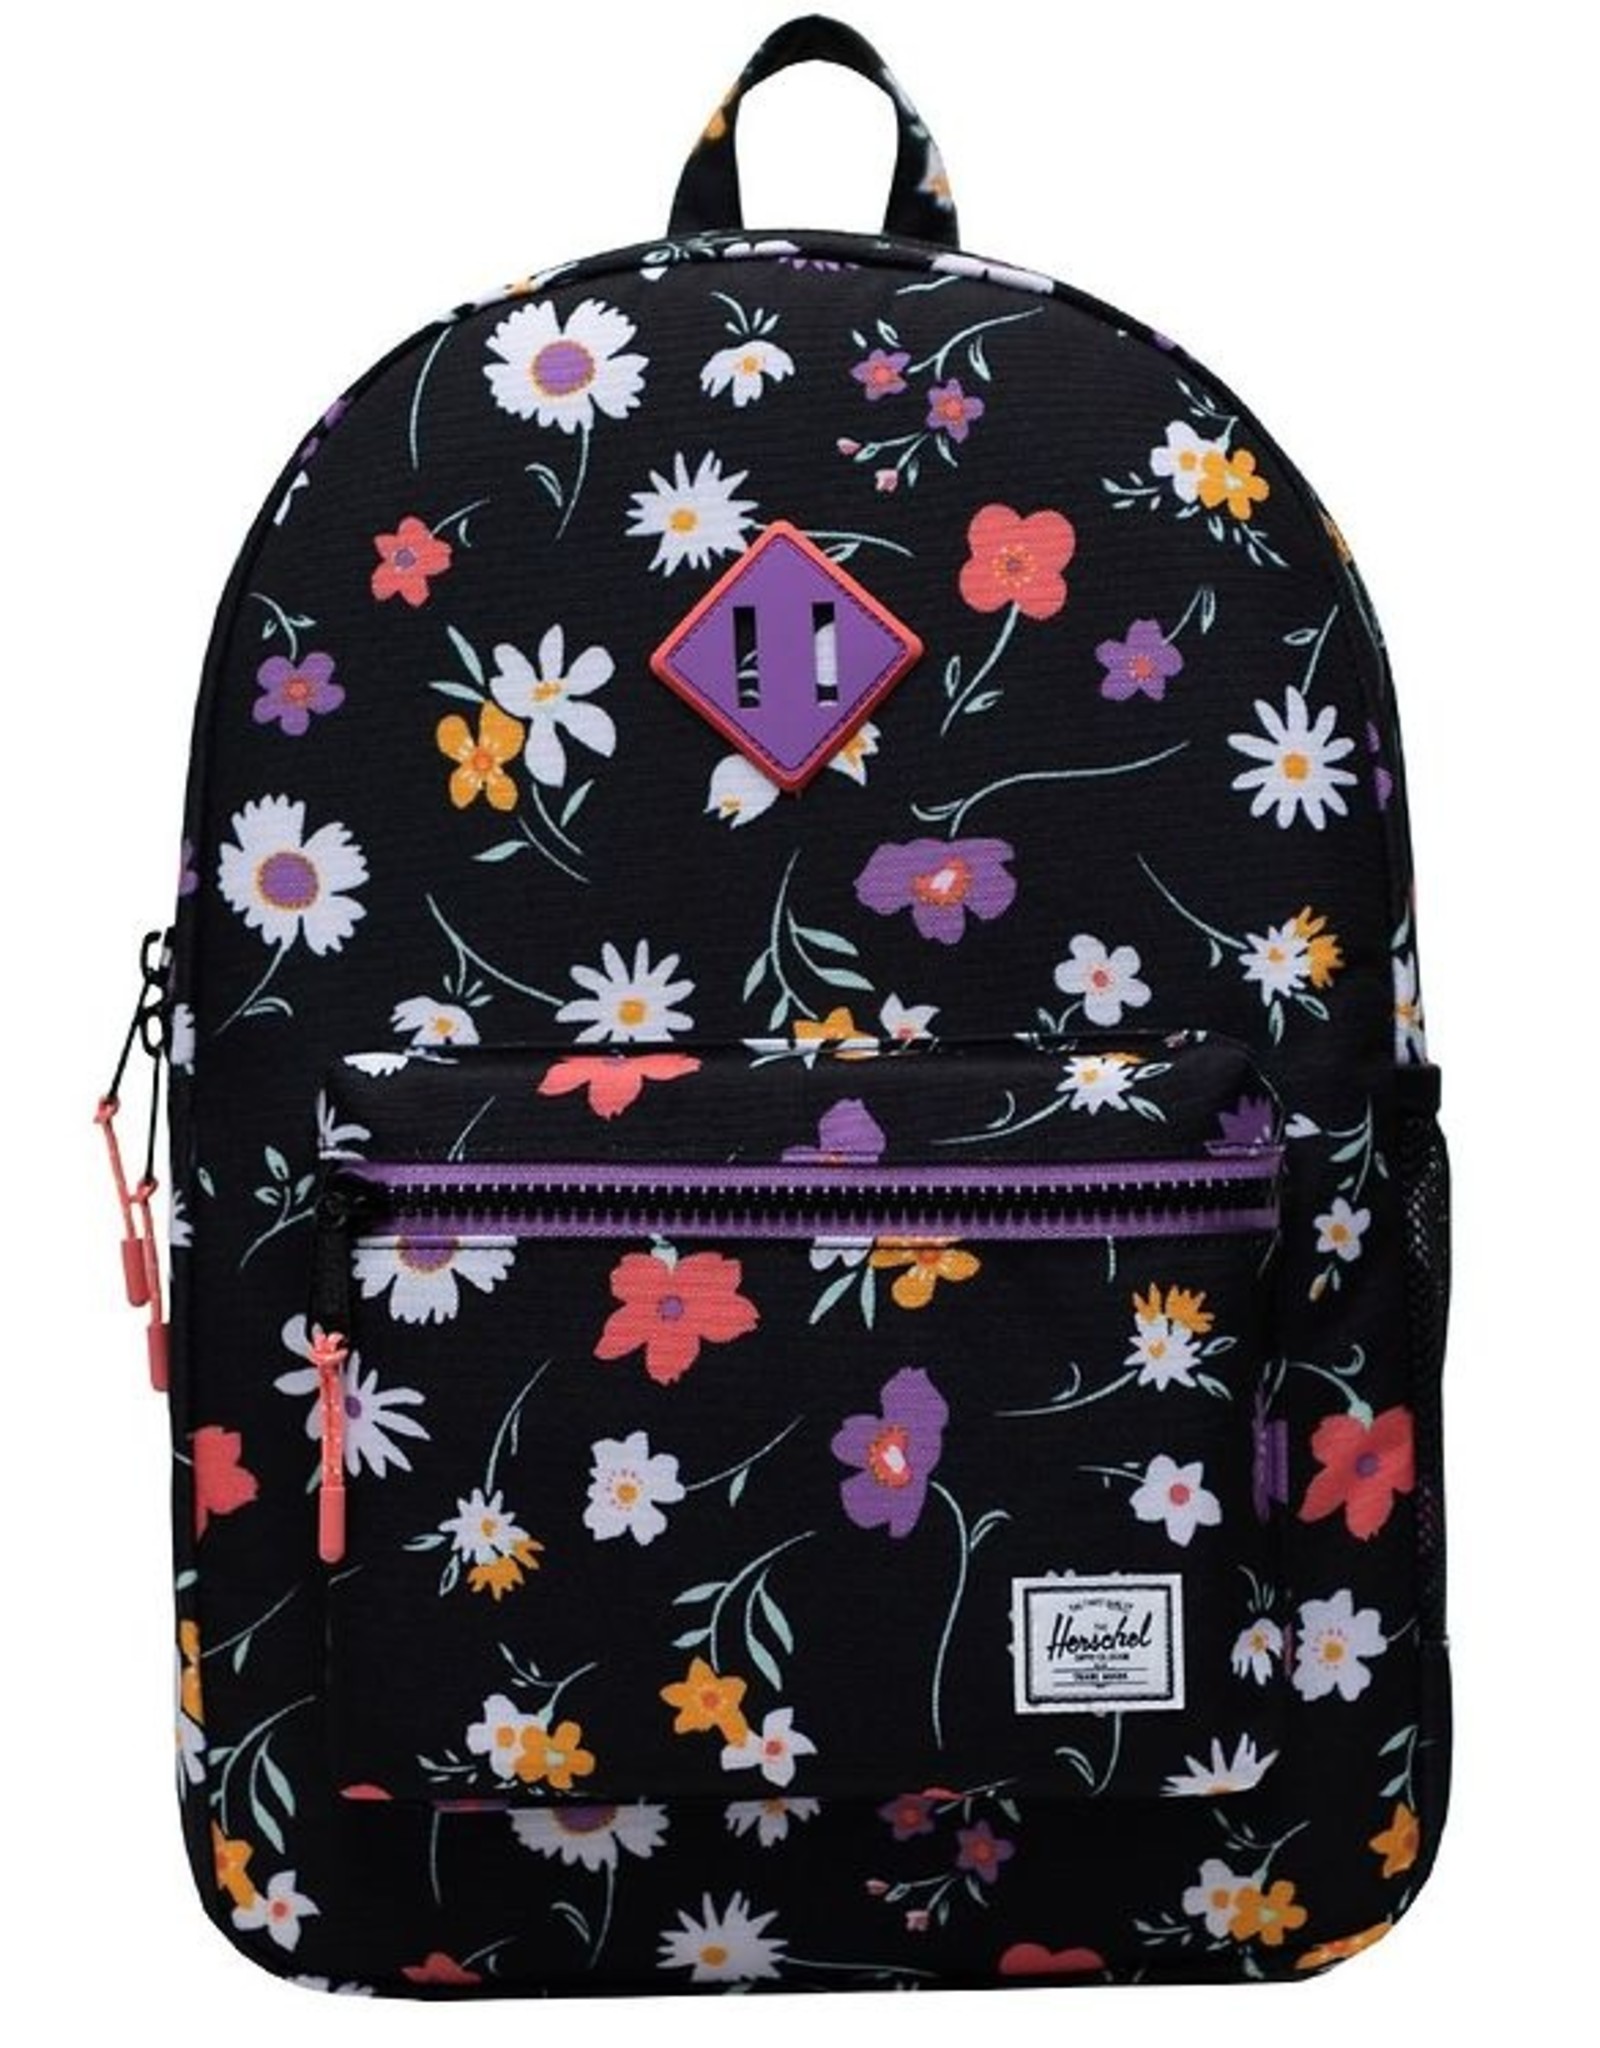 Herschel Supply Co. FA22 Heritage Youth XL